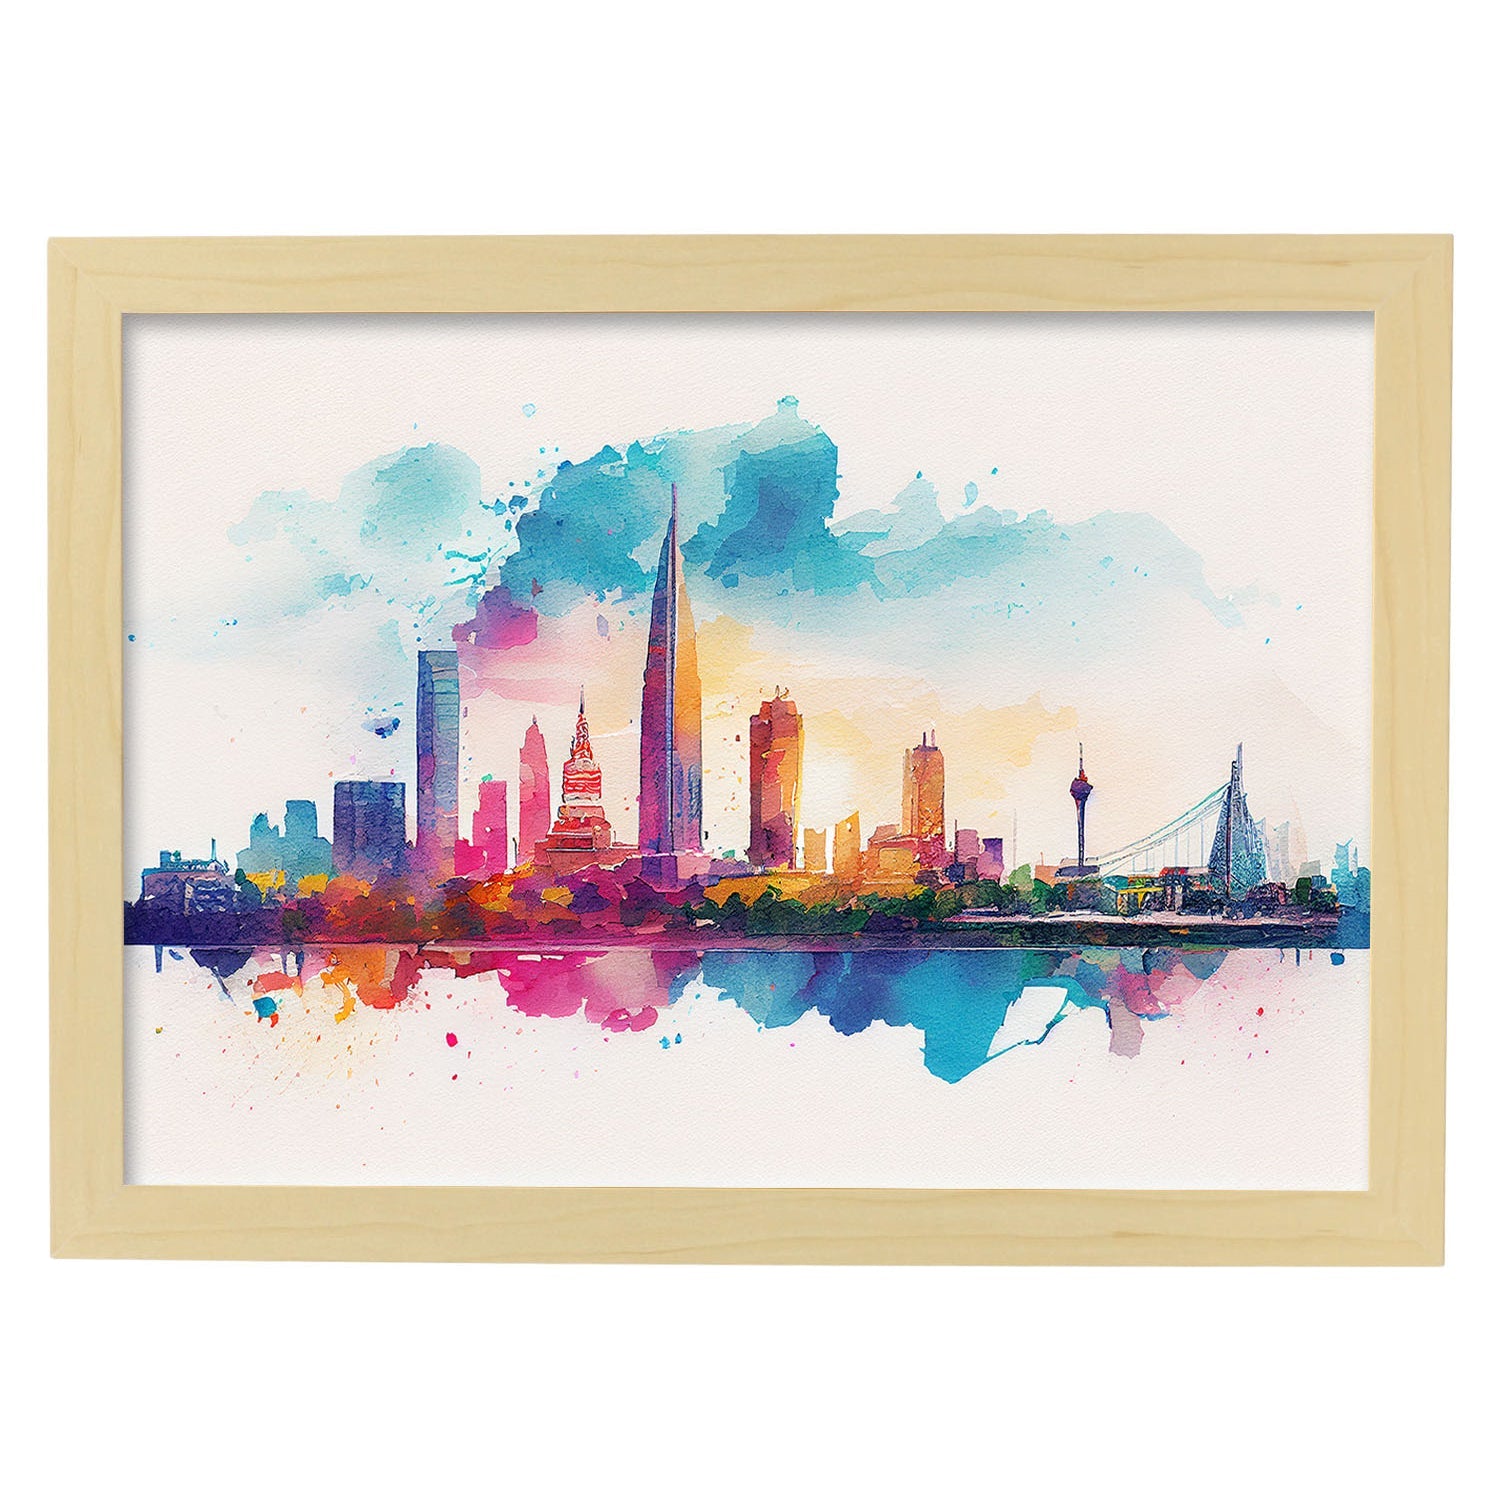 Nacnic watercolor of a skyline of the city of Ho Chi Minh City. Aesthetic Wall Art Prints for Bedroom or Living Room Design.-Artwork-Nacnic-A4-Marco Madera Clara-Nacnic Estudio SL